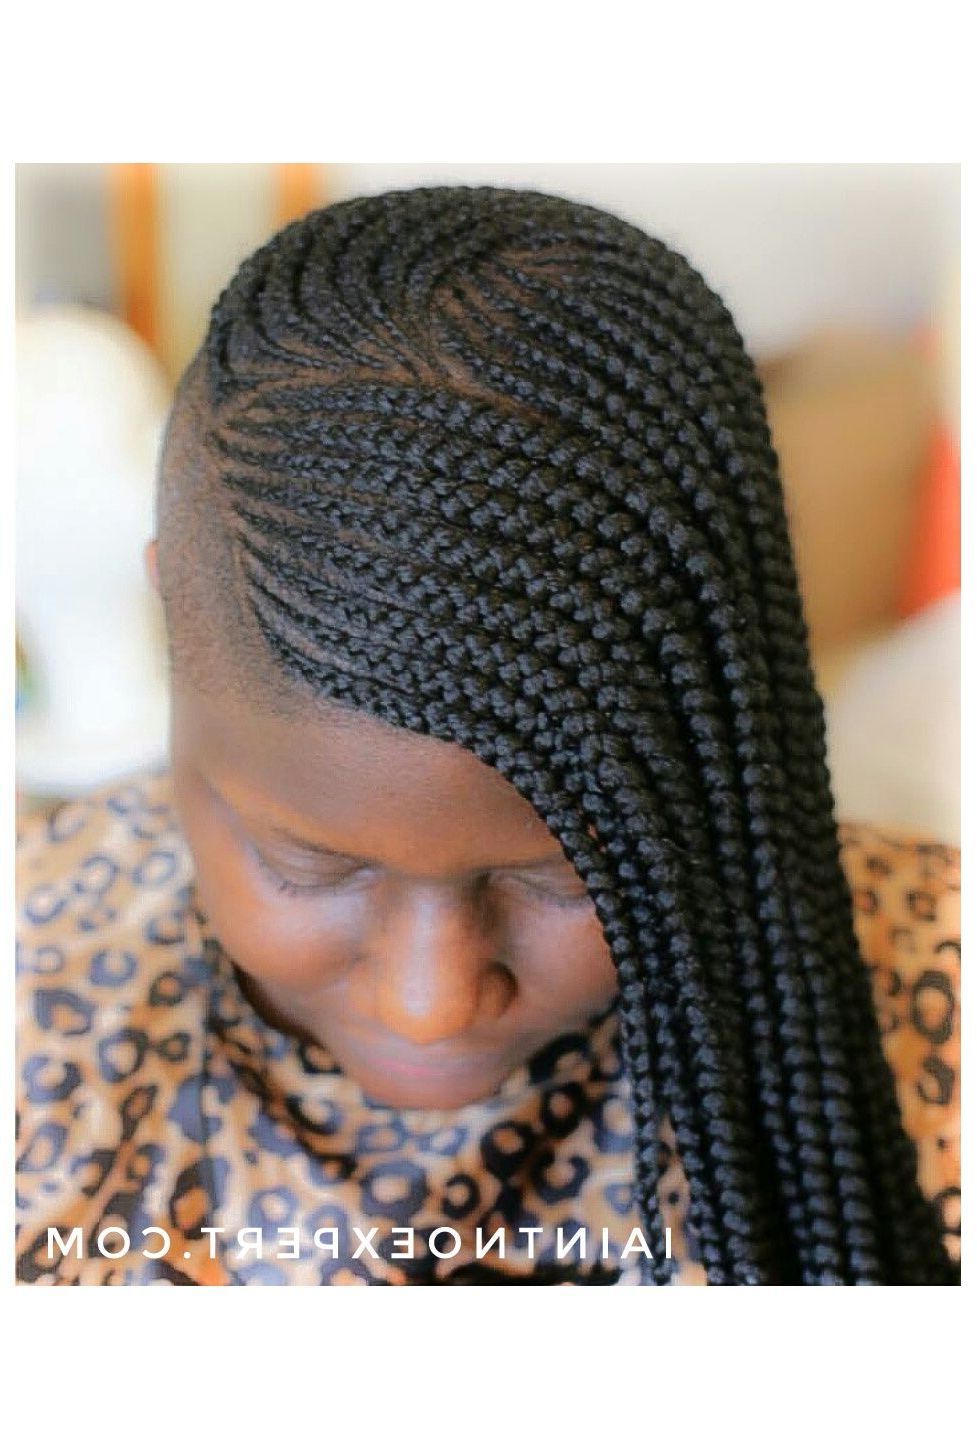 Most Popular Side Shaved Cornrows Braids Hairstyles In Natural Hair, Shaved Sides, Protective Styles, Braids (View 12 of 21)